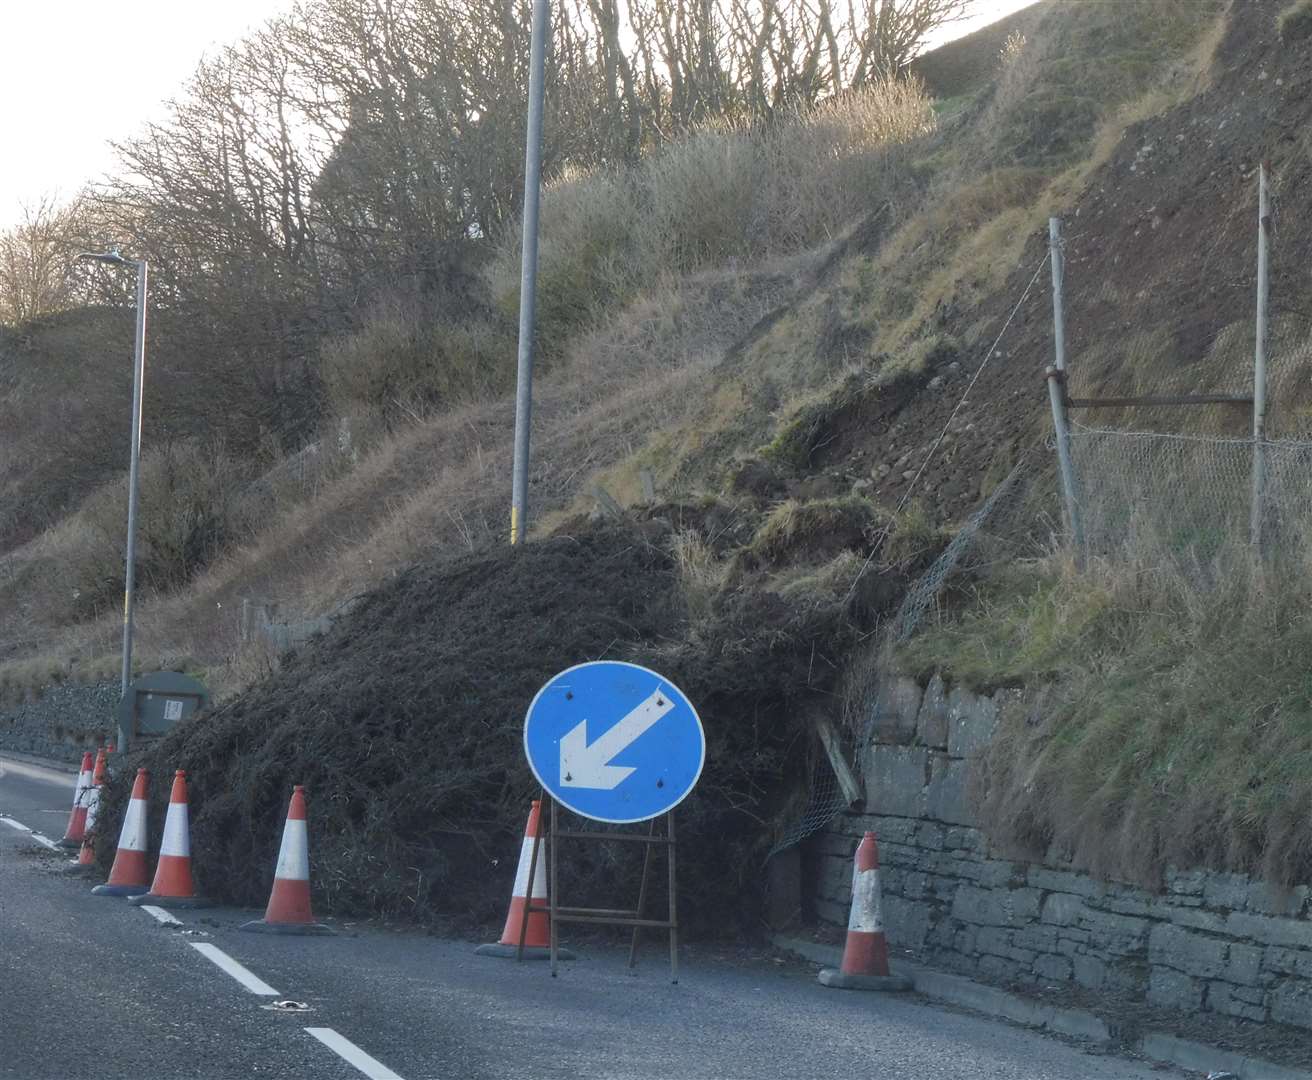 The landslide took place in March which lead to work by BEAR Scotland to secure the cliff. Picture: Alison Reiss